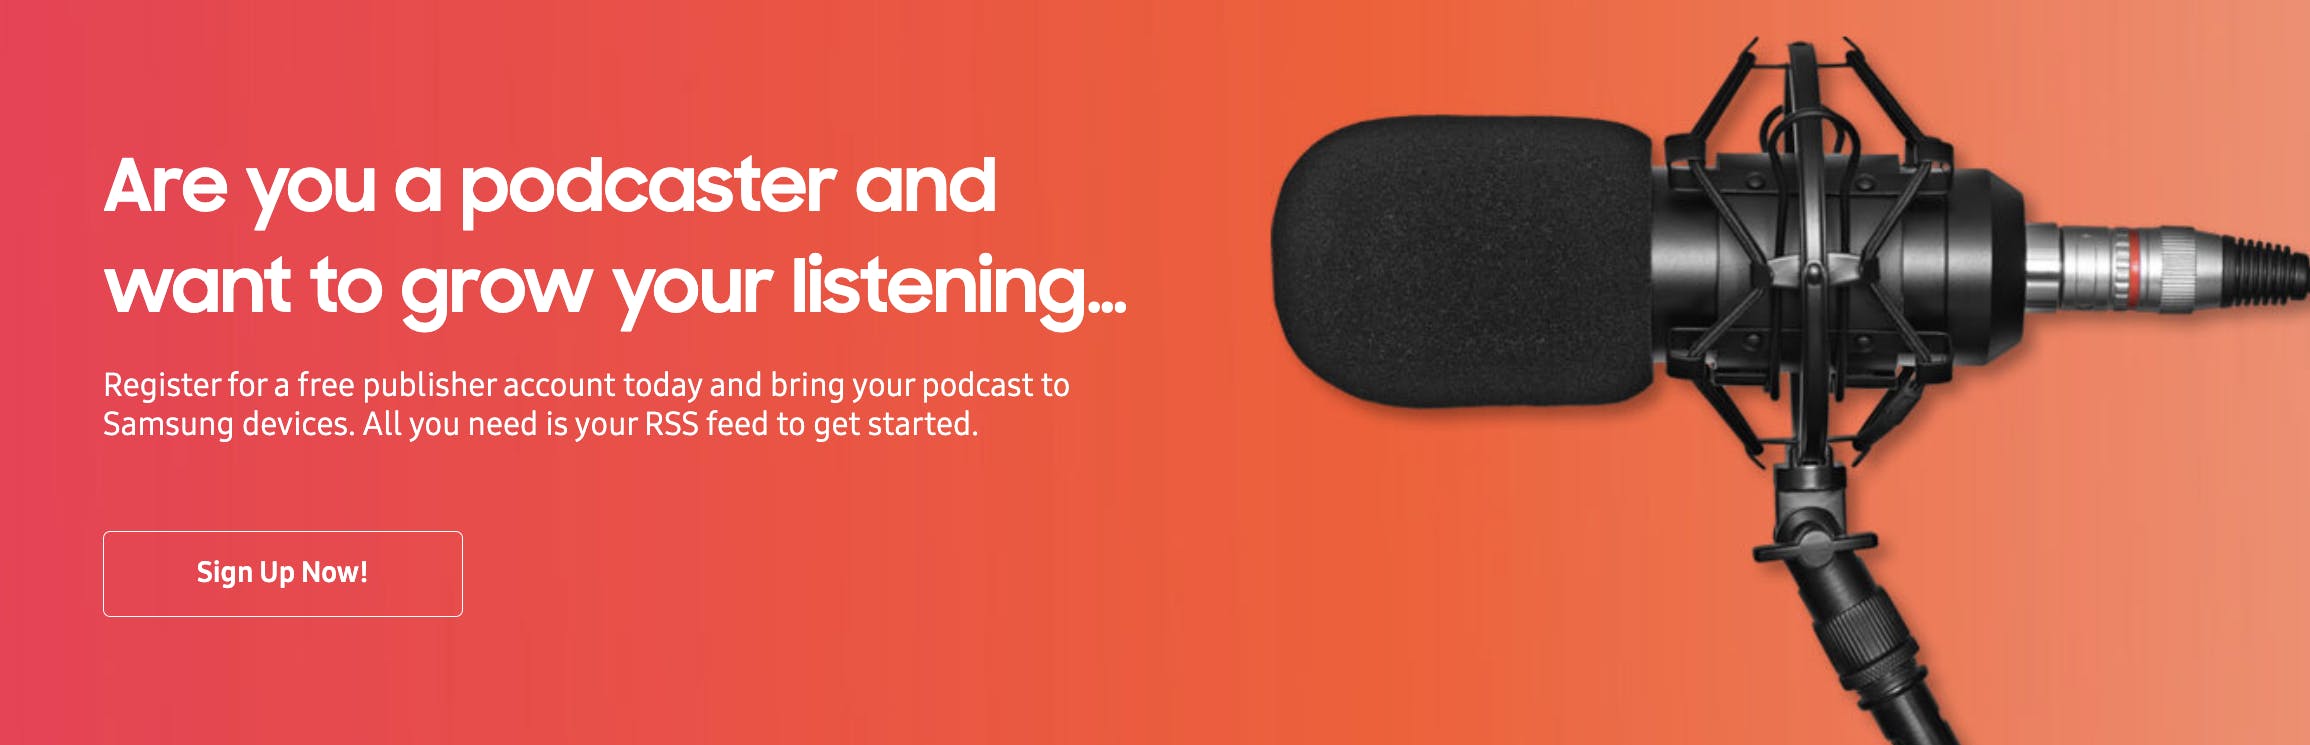 Pink and orange gradient background with a podcast mic on the right and white text on the left